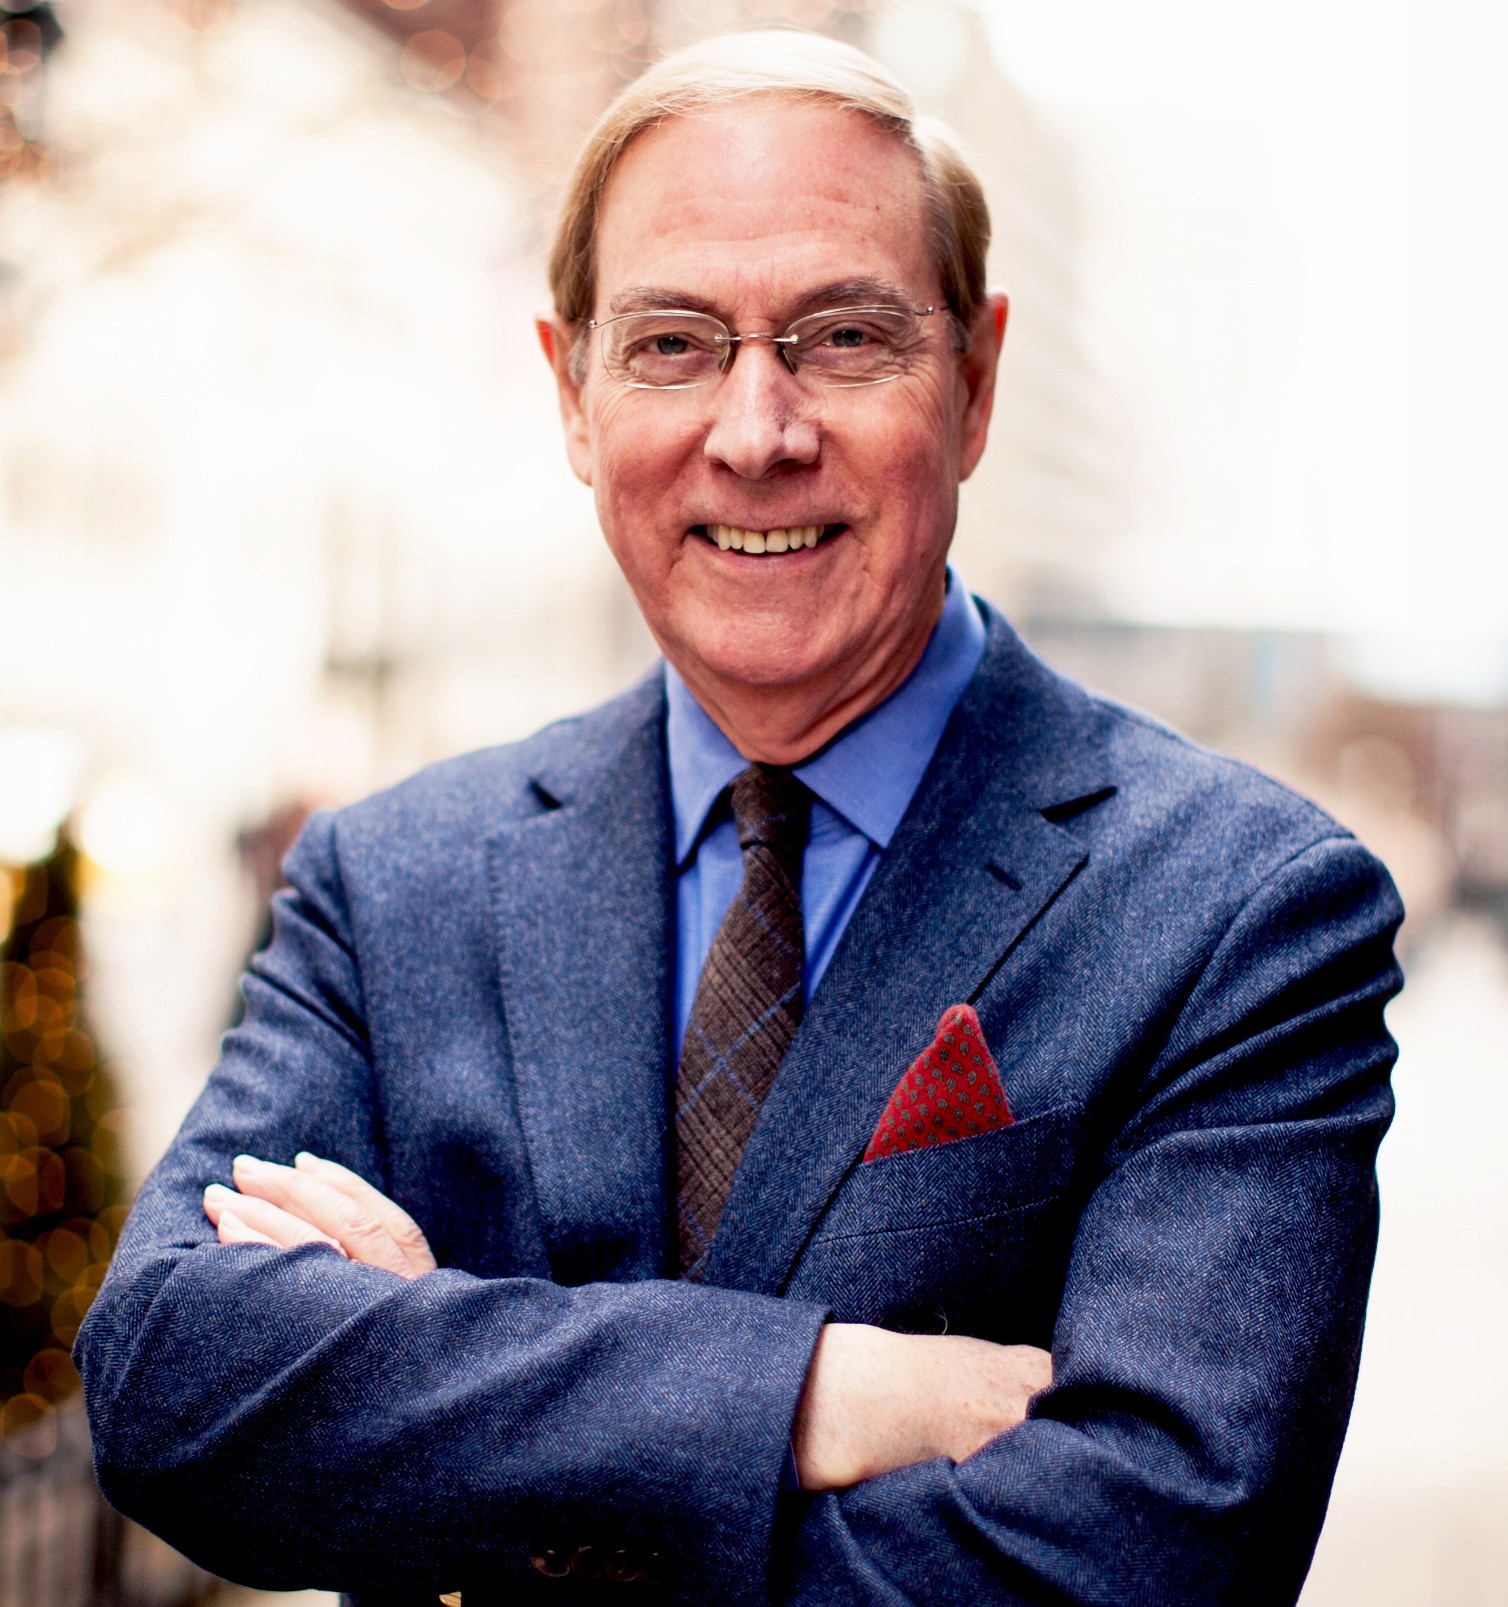 Best known as an author, Gary Chapman also served the same Baptist